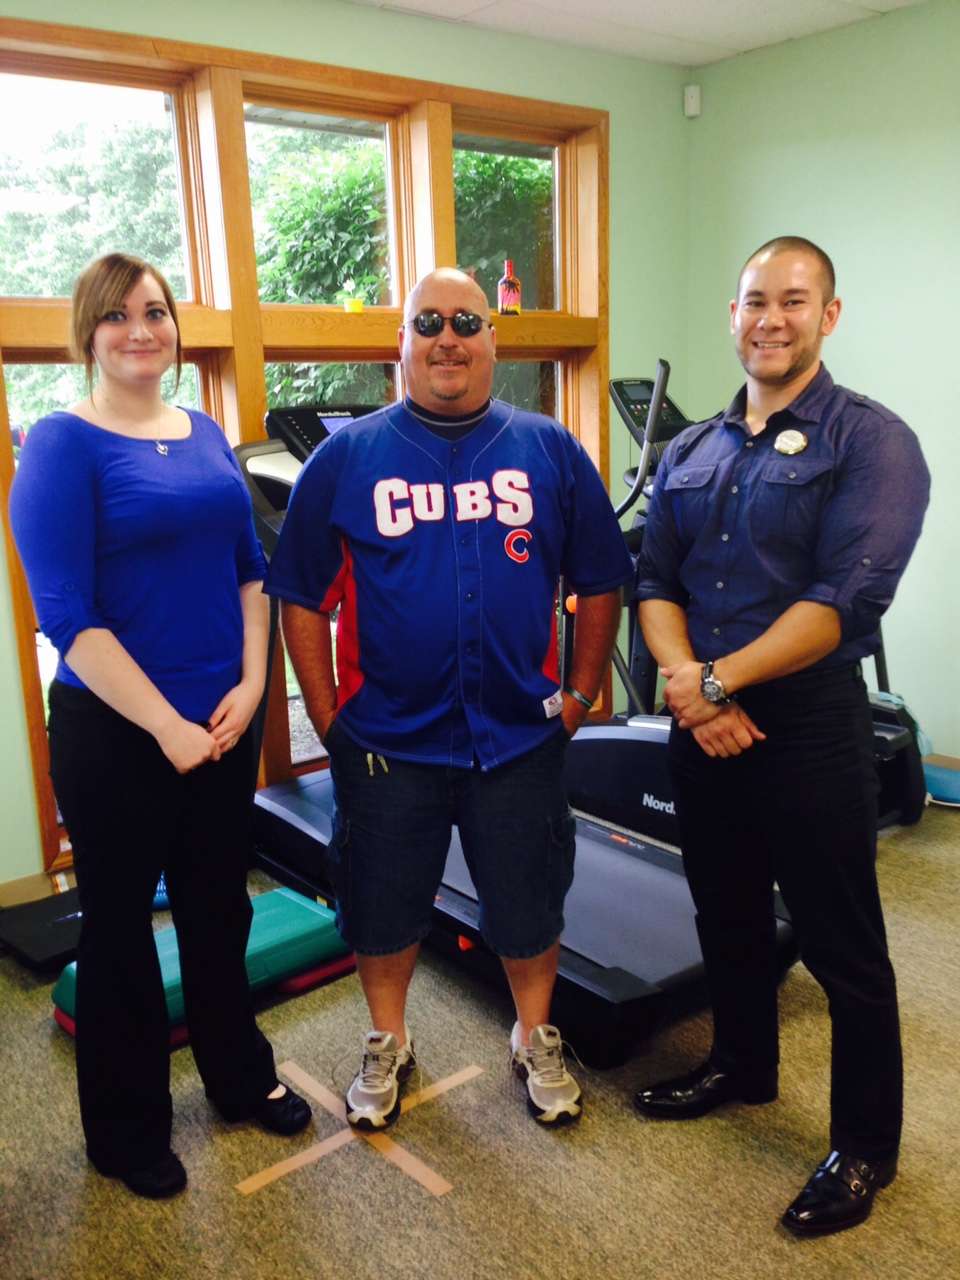 Chesterton Physical Therapy, Inc | 425 Sand Creek Dr N # C, Chesterton, IN 46304 | Phone: (219) 926-9779